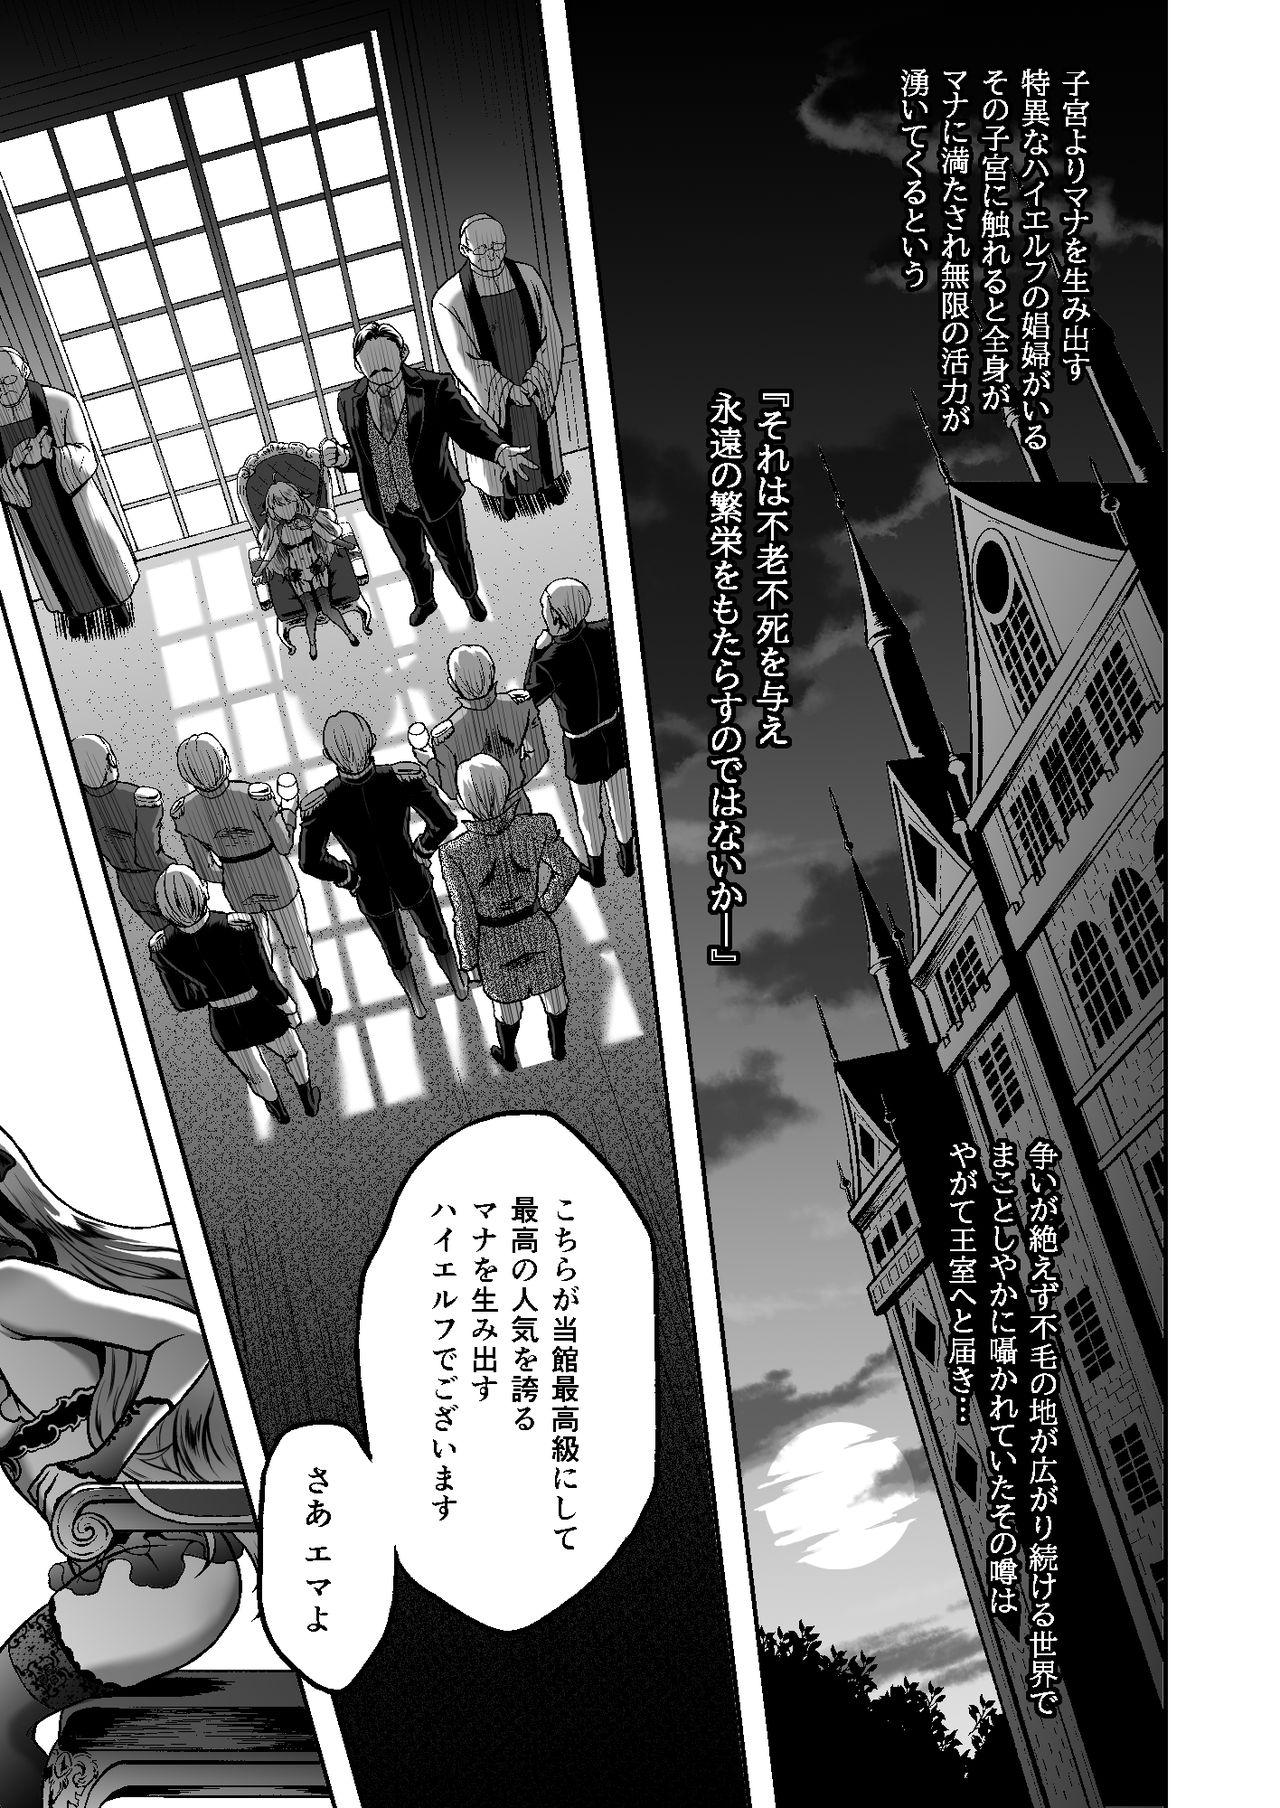 Submission Tasogare no Shou Elf 6 - The story of Emma's side - Original Hard Core Porn - Page 3